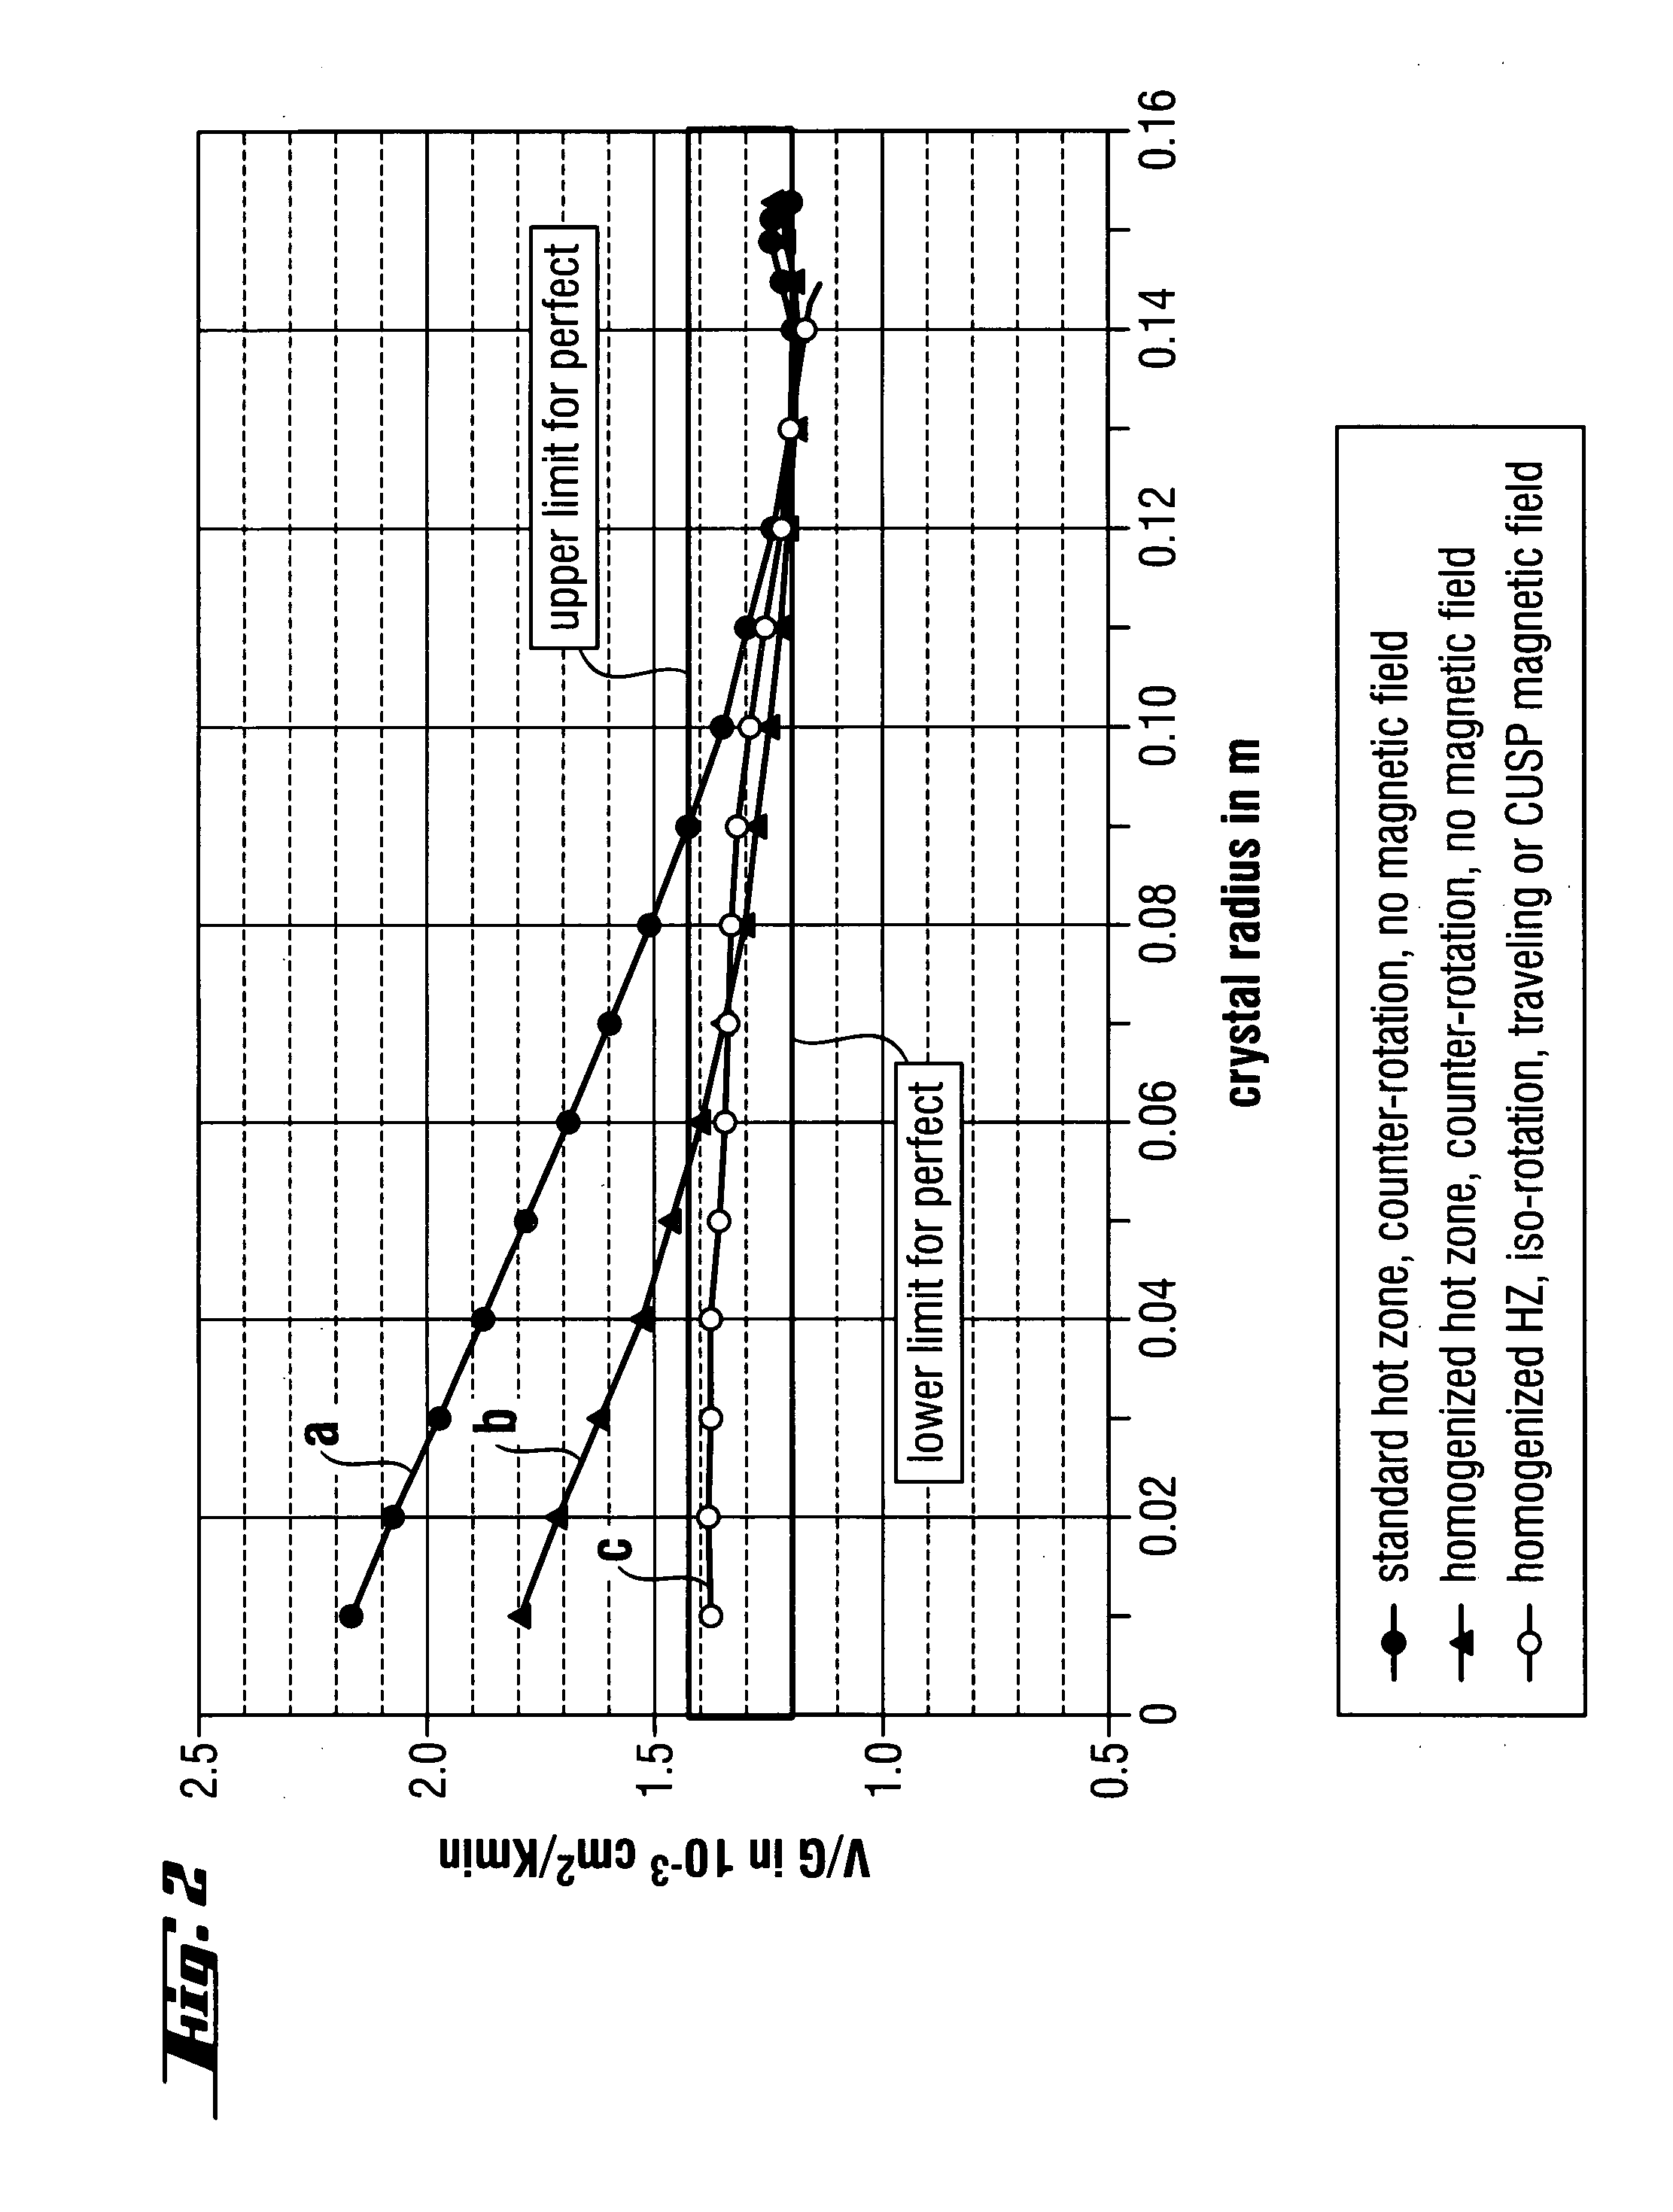 Method and device for the production of a silicon single crystal, silicon single crystal, and silicon semiconductor wafers with determined defect distributions